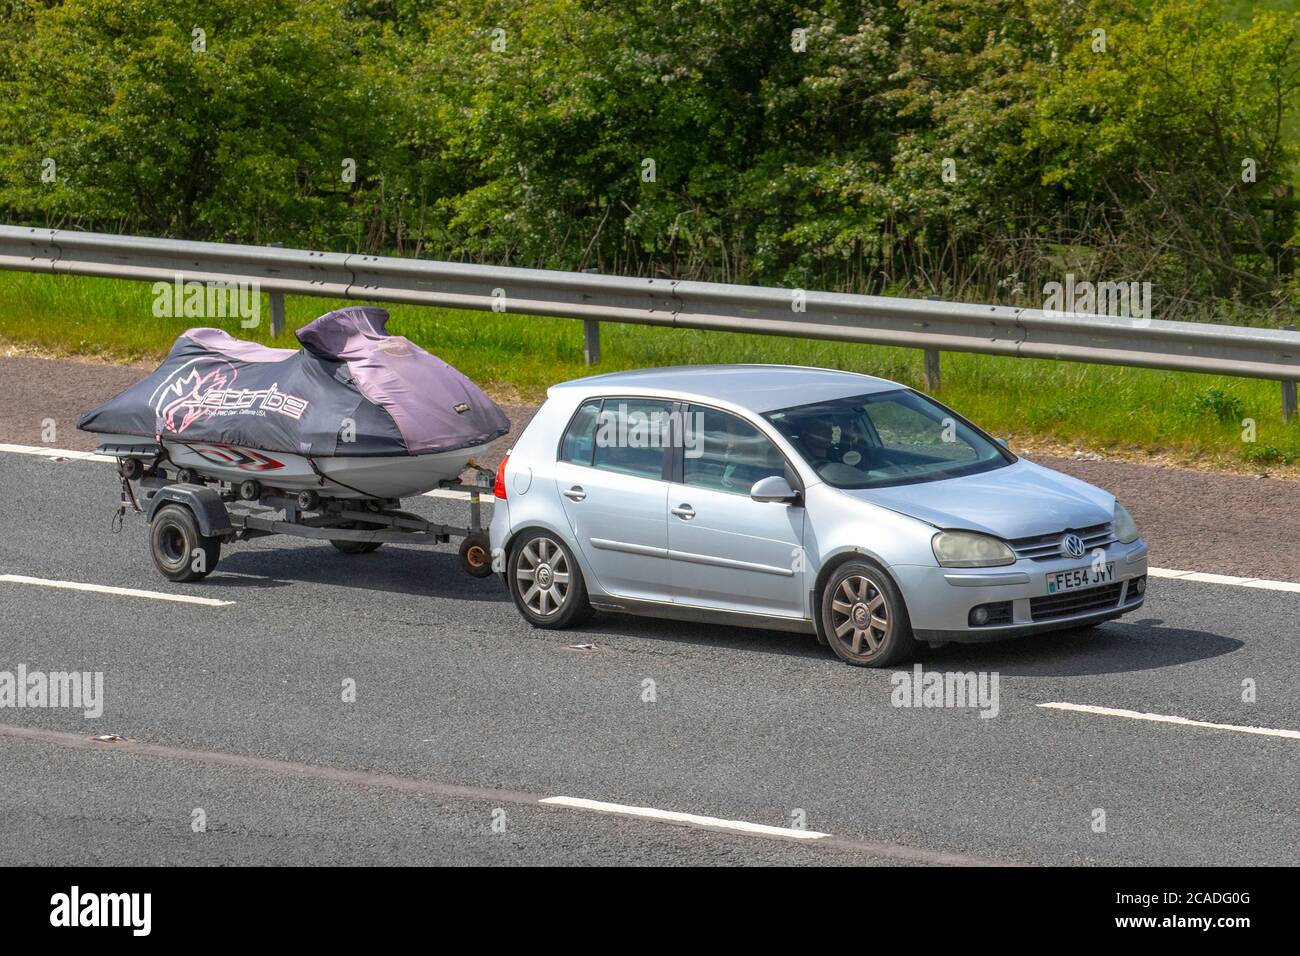 2004 silver VW Volkswagen Golf GT TDI towing covered jetskis on trailer; Vehicular traffic moving vehicles, cars driving vehicle on UK roads, motors, motoring on the M6 motorway highway network. Stock Photo